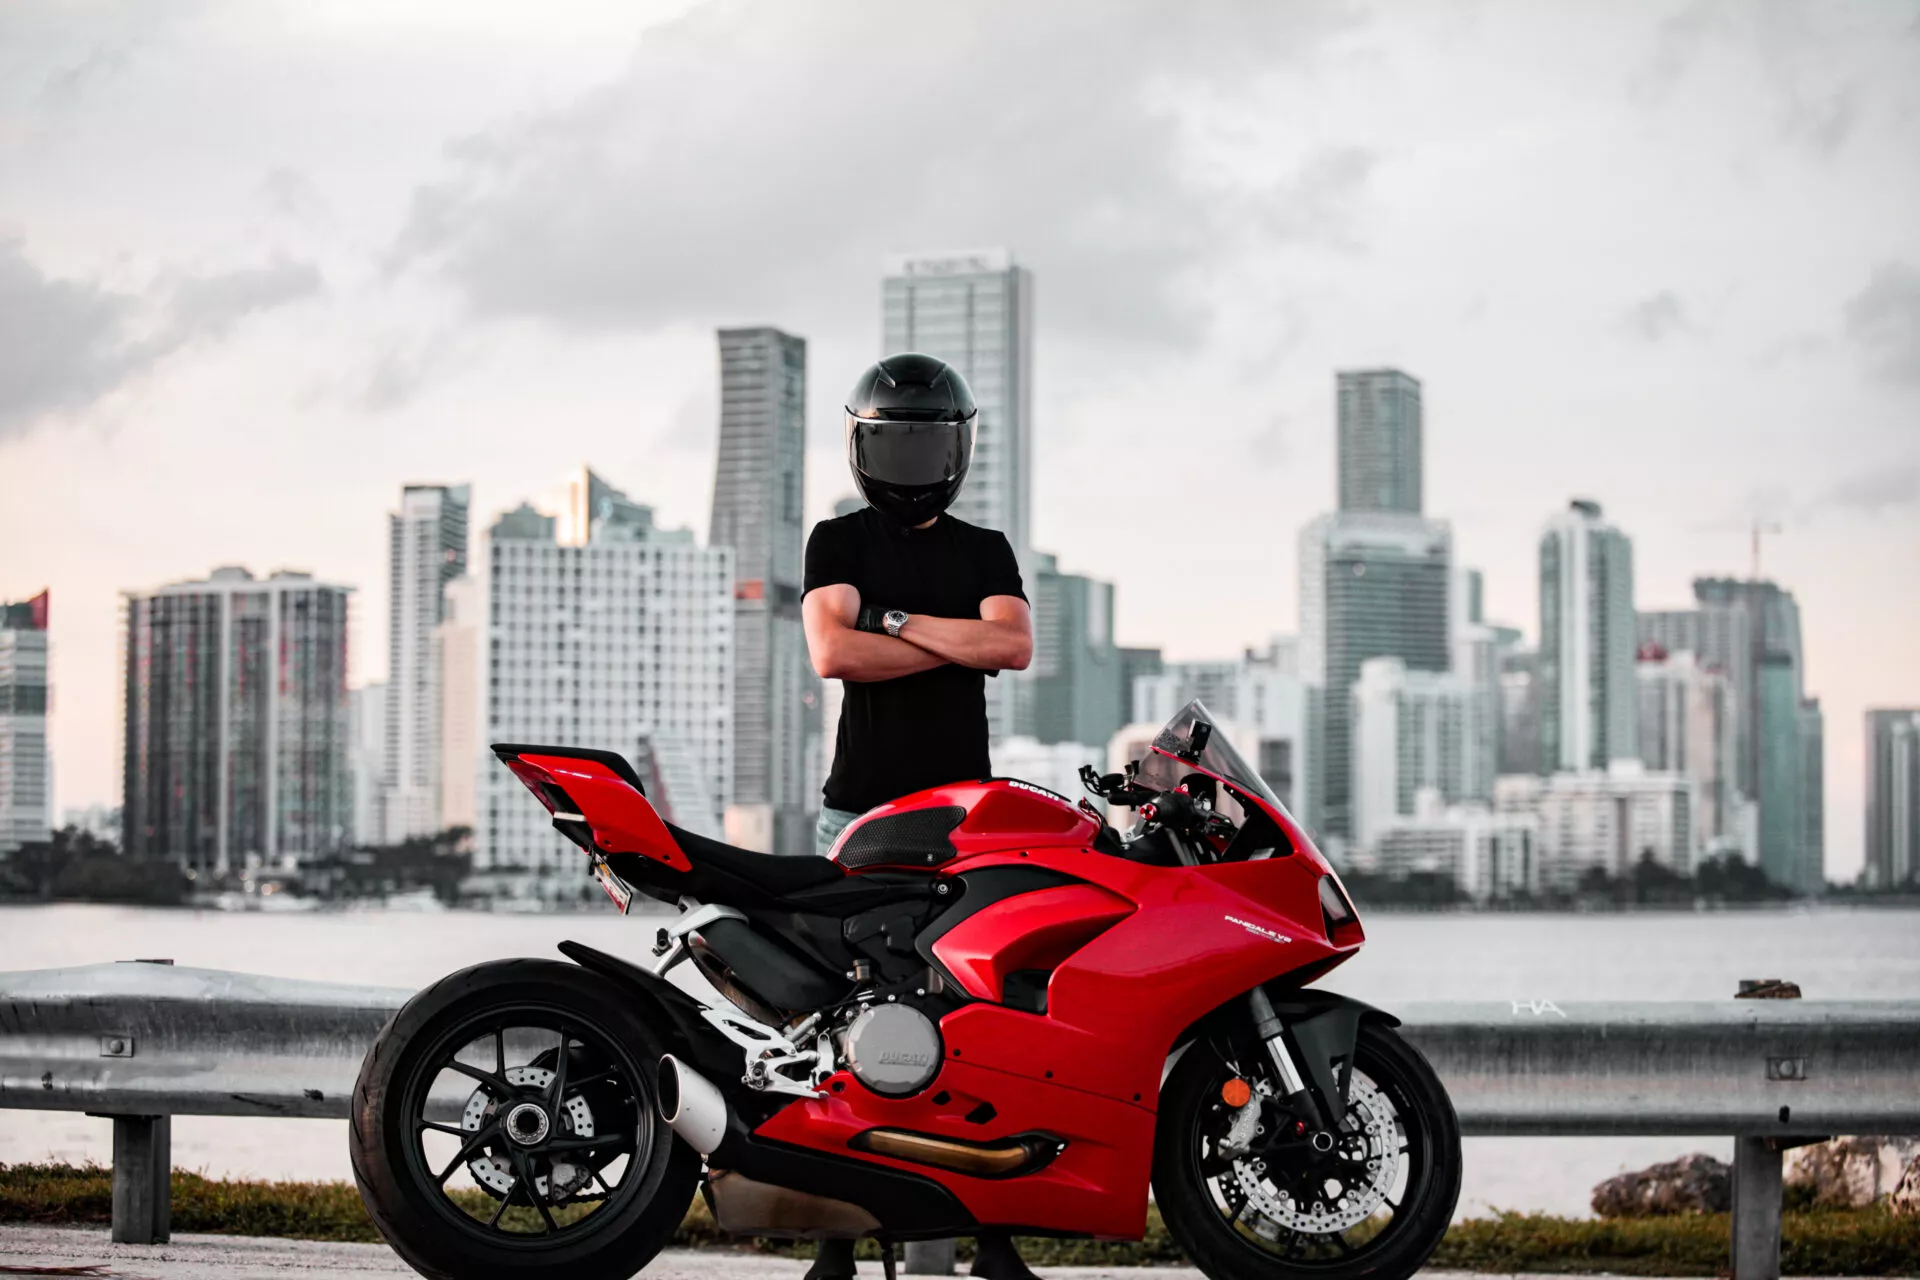 Miami Motorcycle Rentals in USA, North America | Motorcycles - Rated 0.9